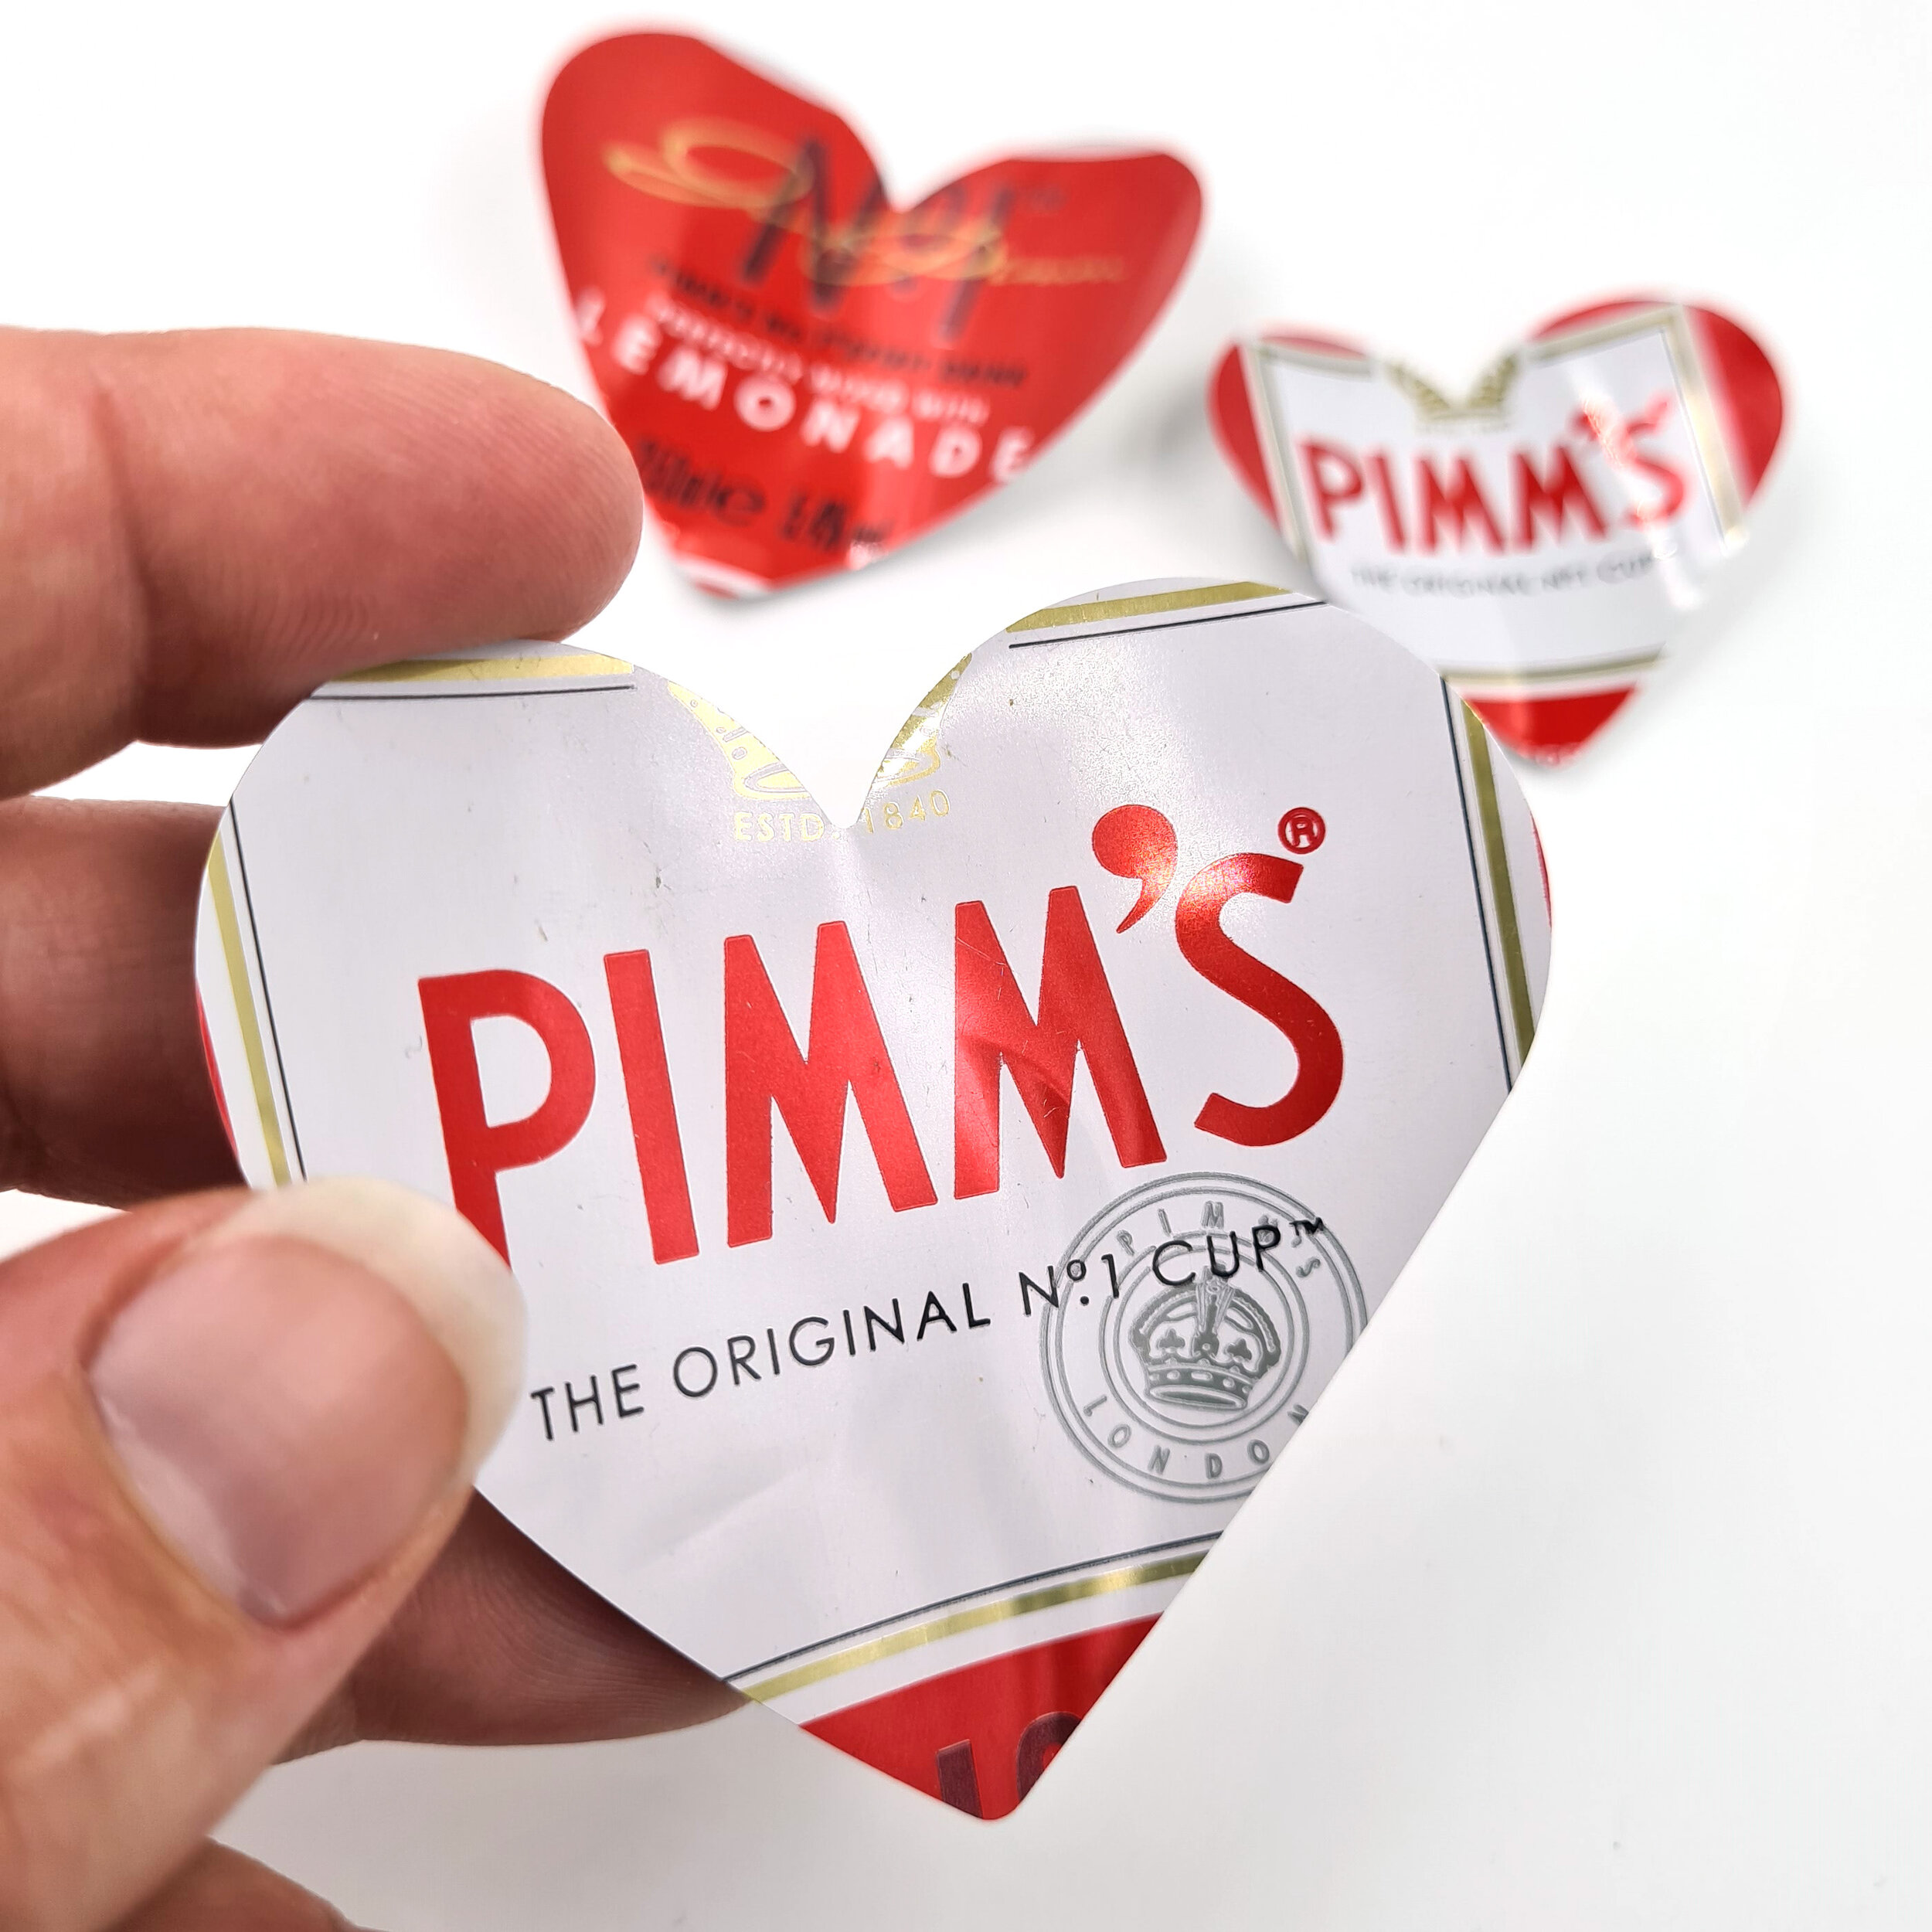 Red and white sustainable Pimm's Heart Can Magnets holding